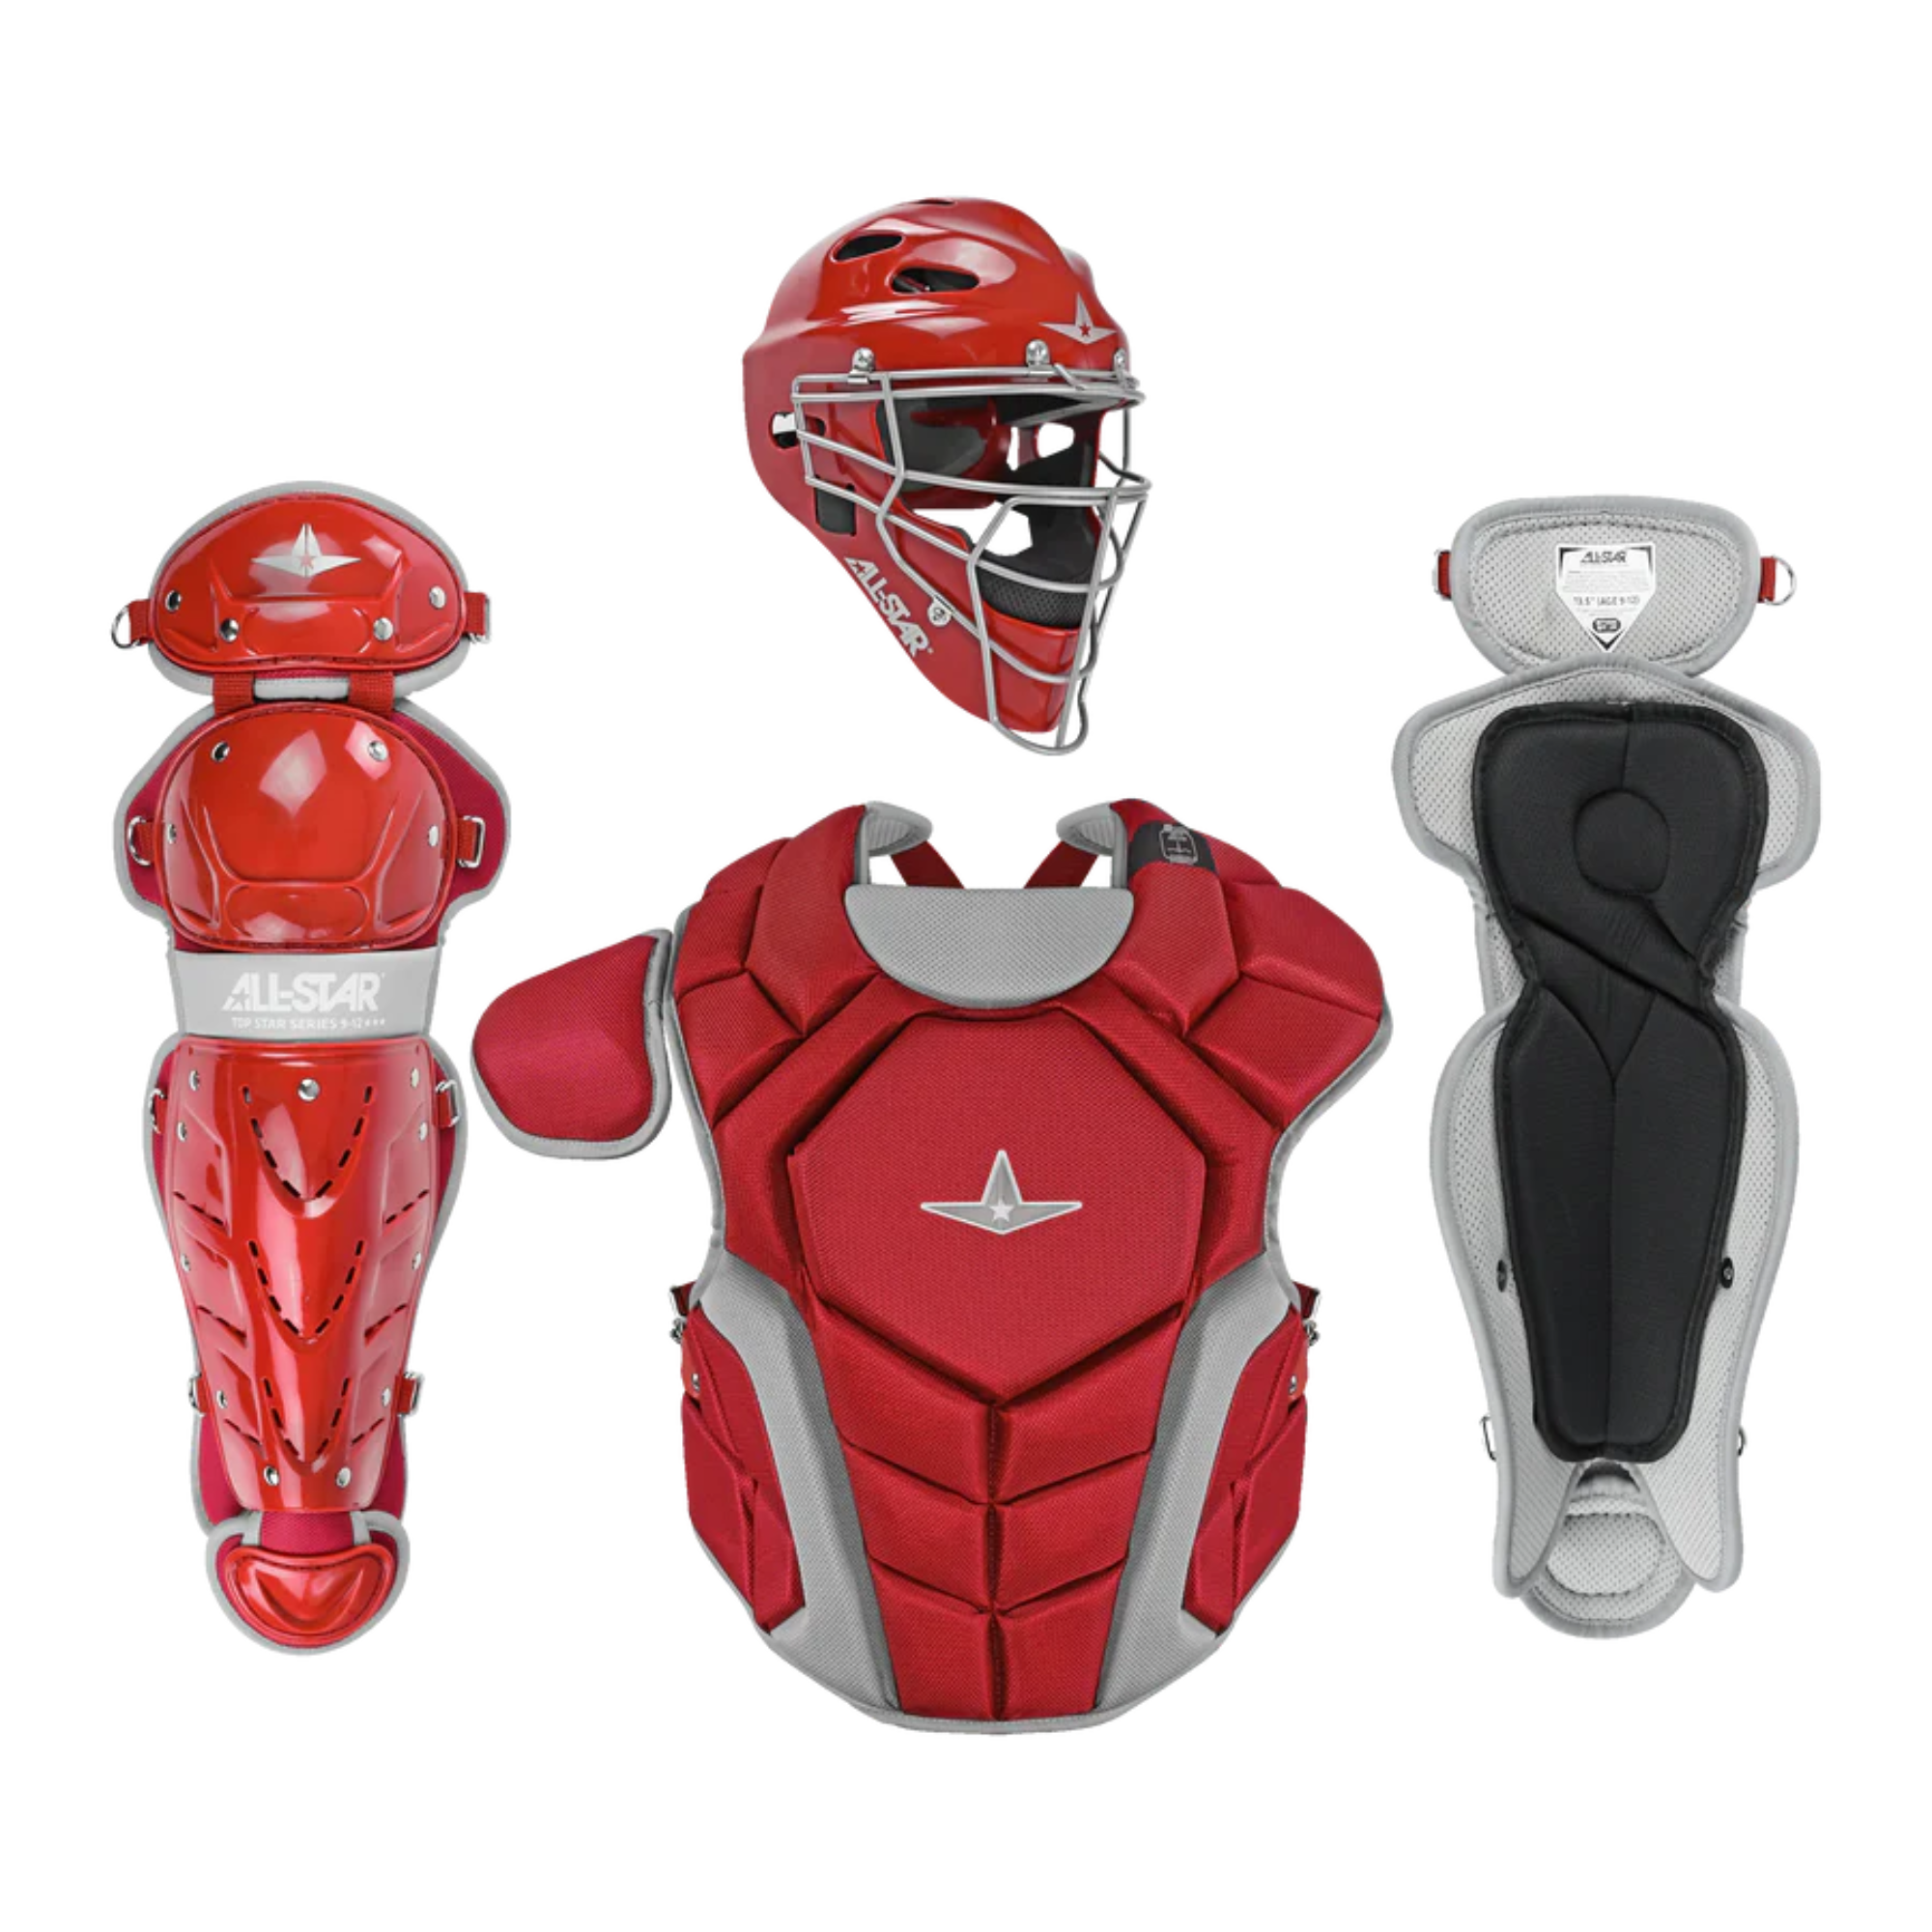 All-Star Top Star Catcher's Kit / Meets NOCSAE Age 7-9